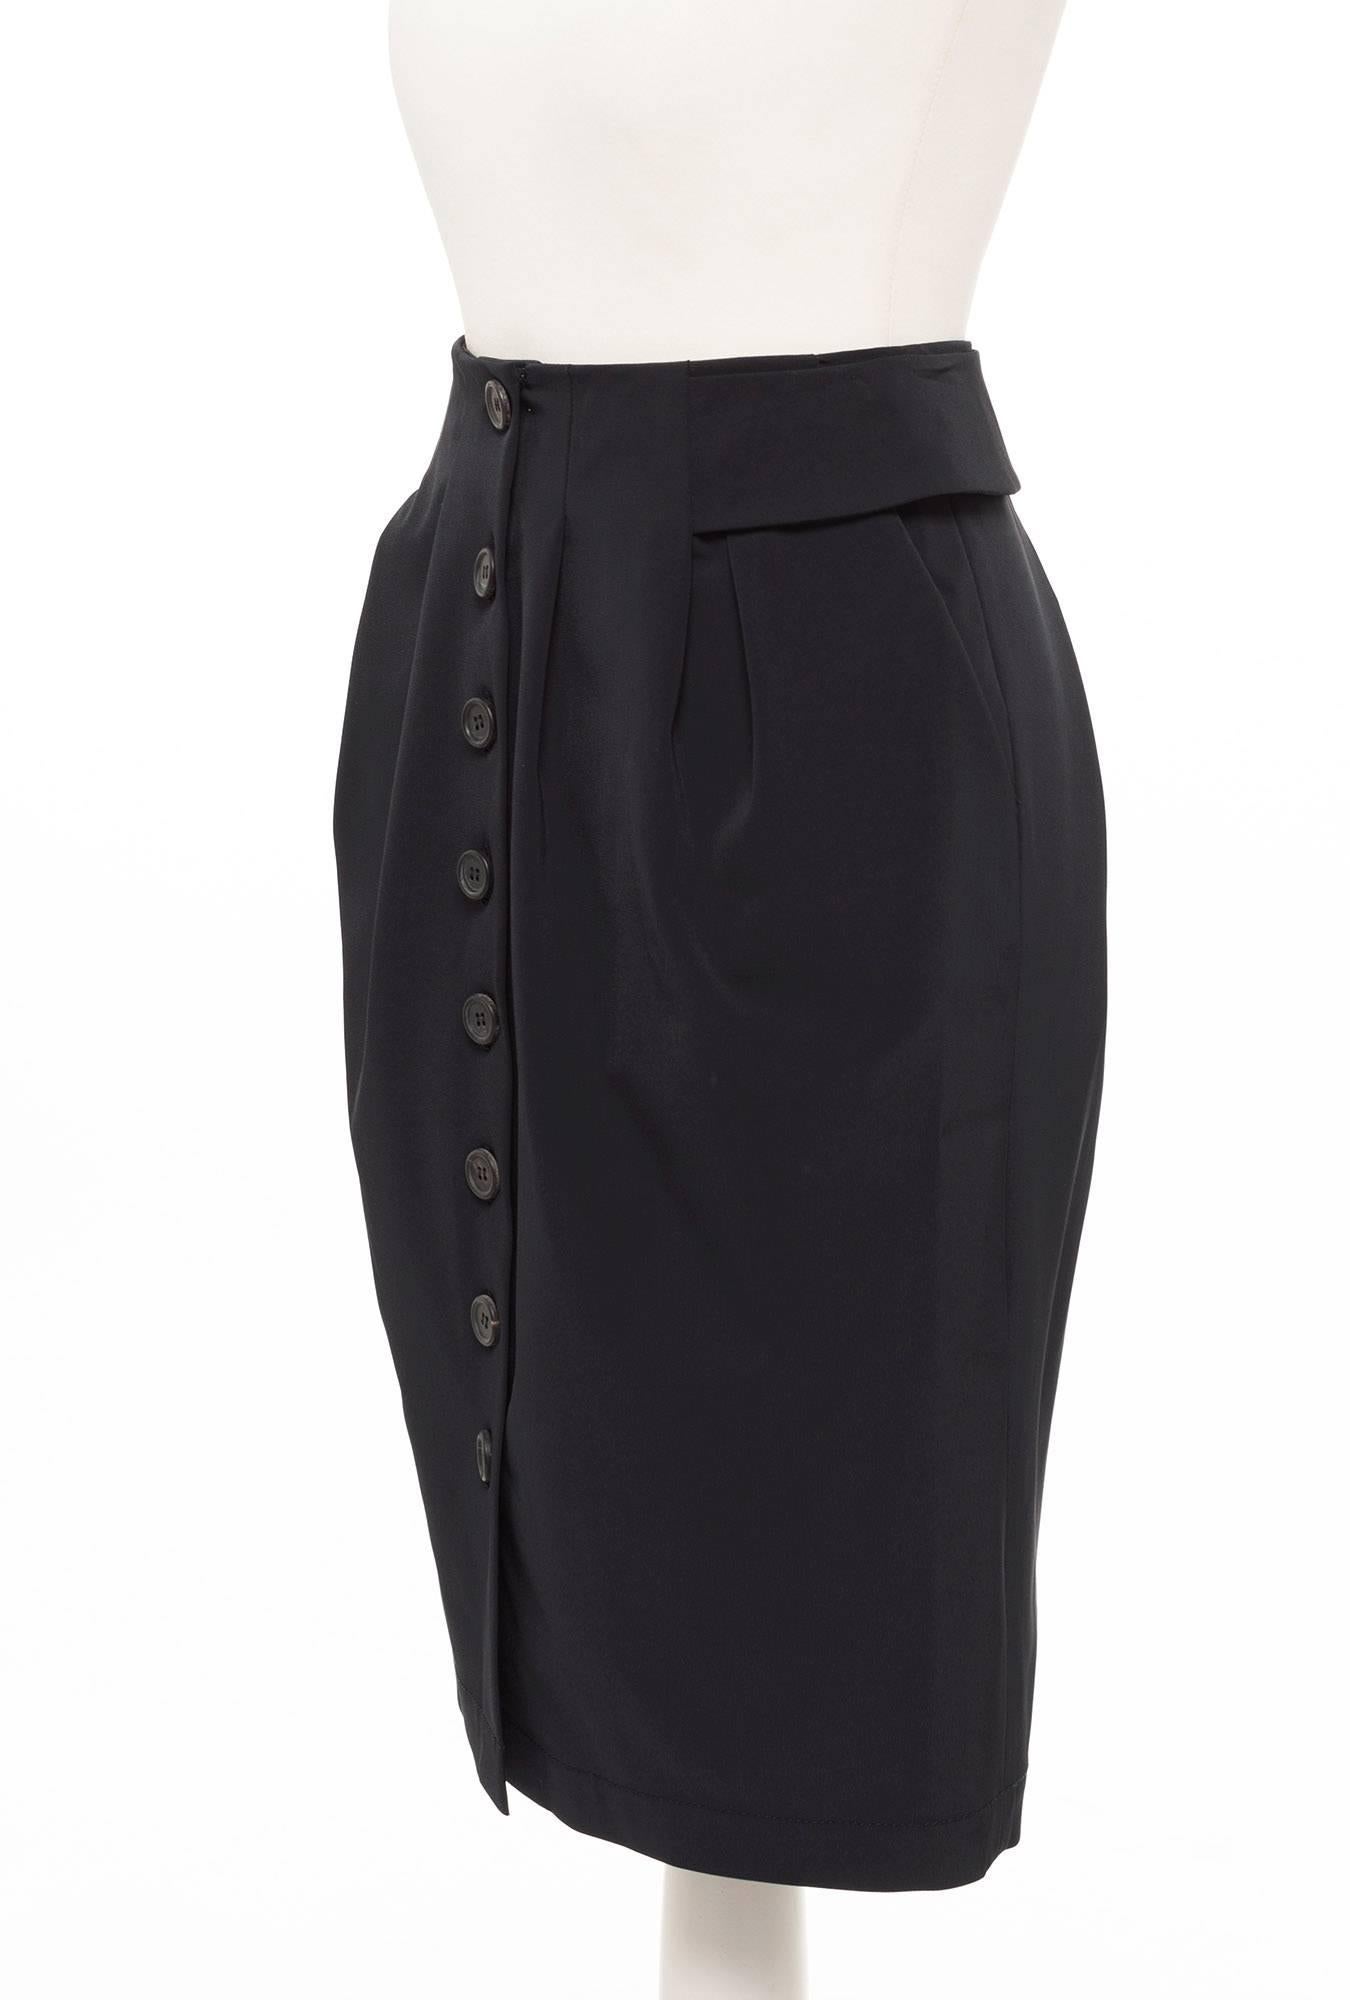 The fabric that Miuccia Prada loves, stretch anything. High waisted pleated skirt with interesting waist detail, 8 front buttons and just below knee.

italian 40 , french 36, german 34, UK 8, USA 4